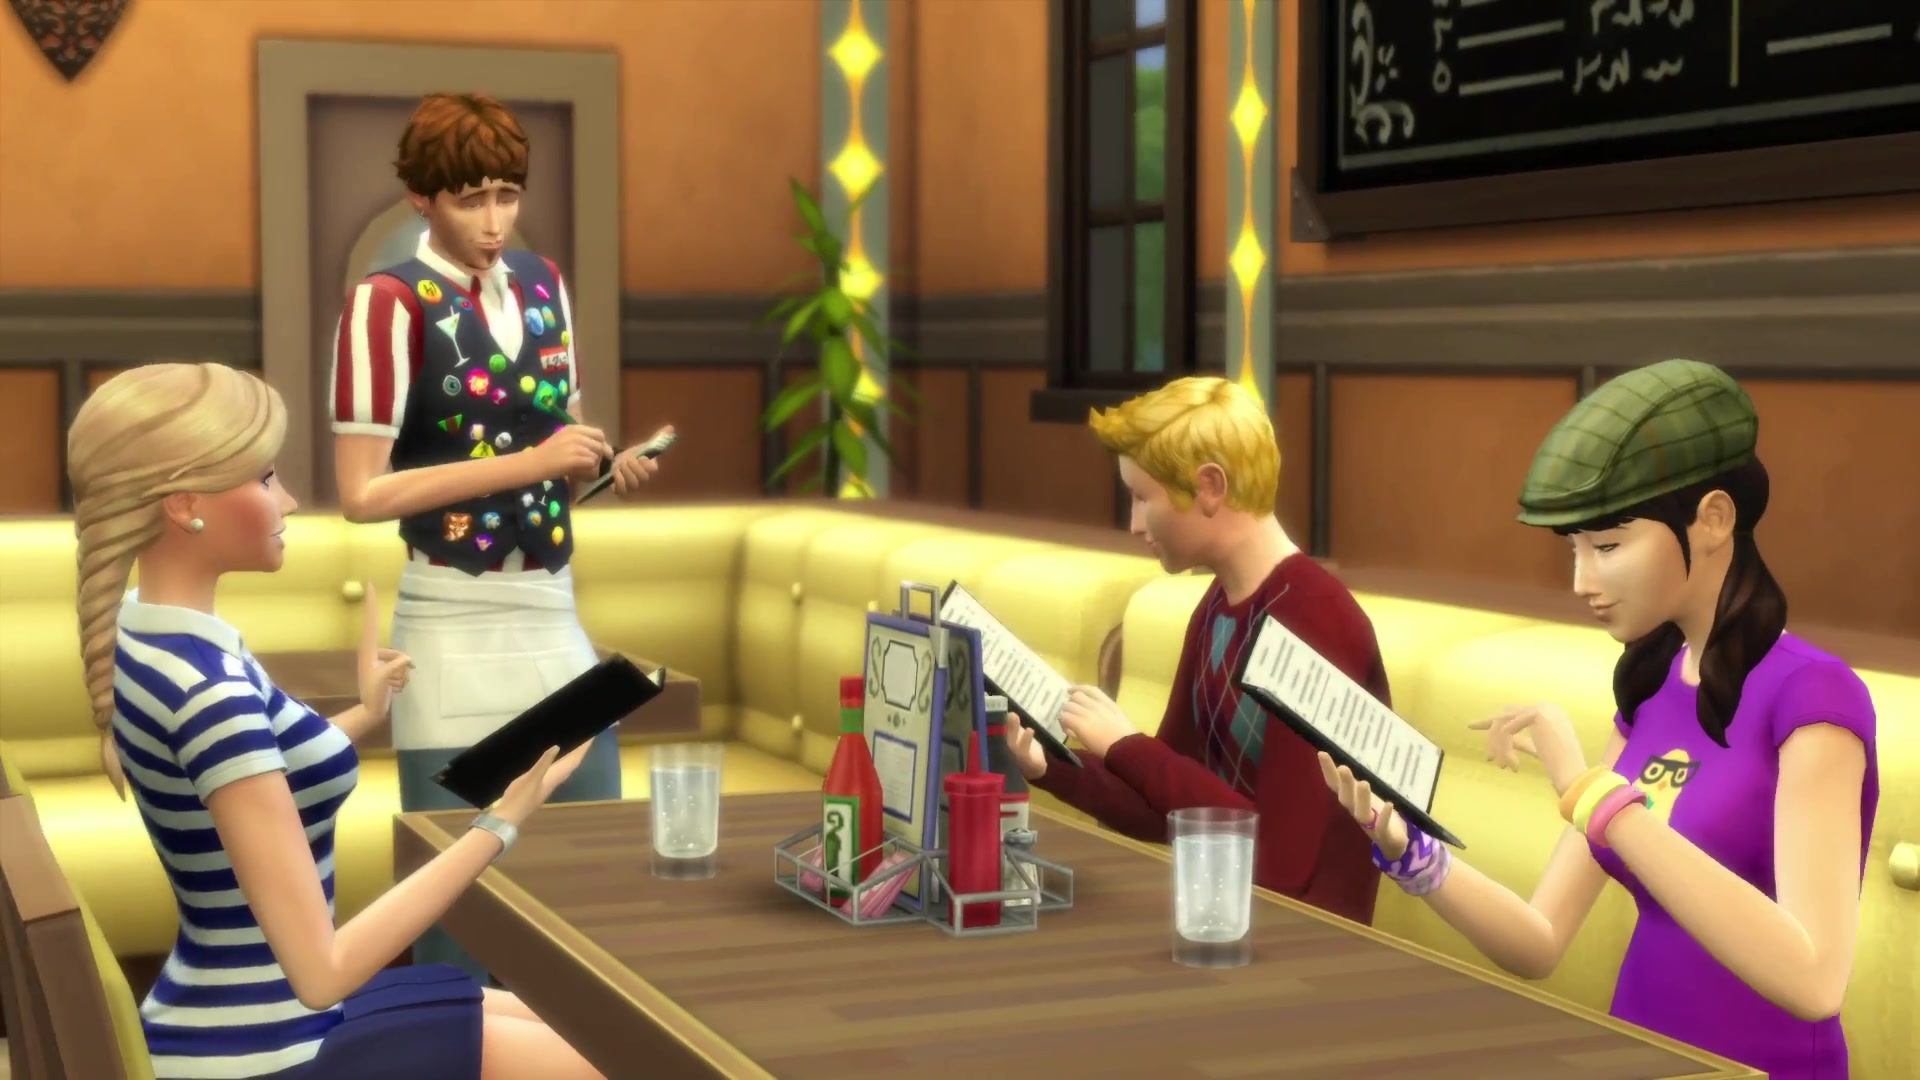 The Sims 4 Dine Out- Own Restaurants Official Gameplay Trailer 0688